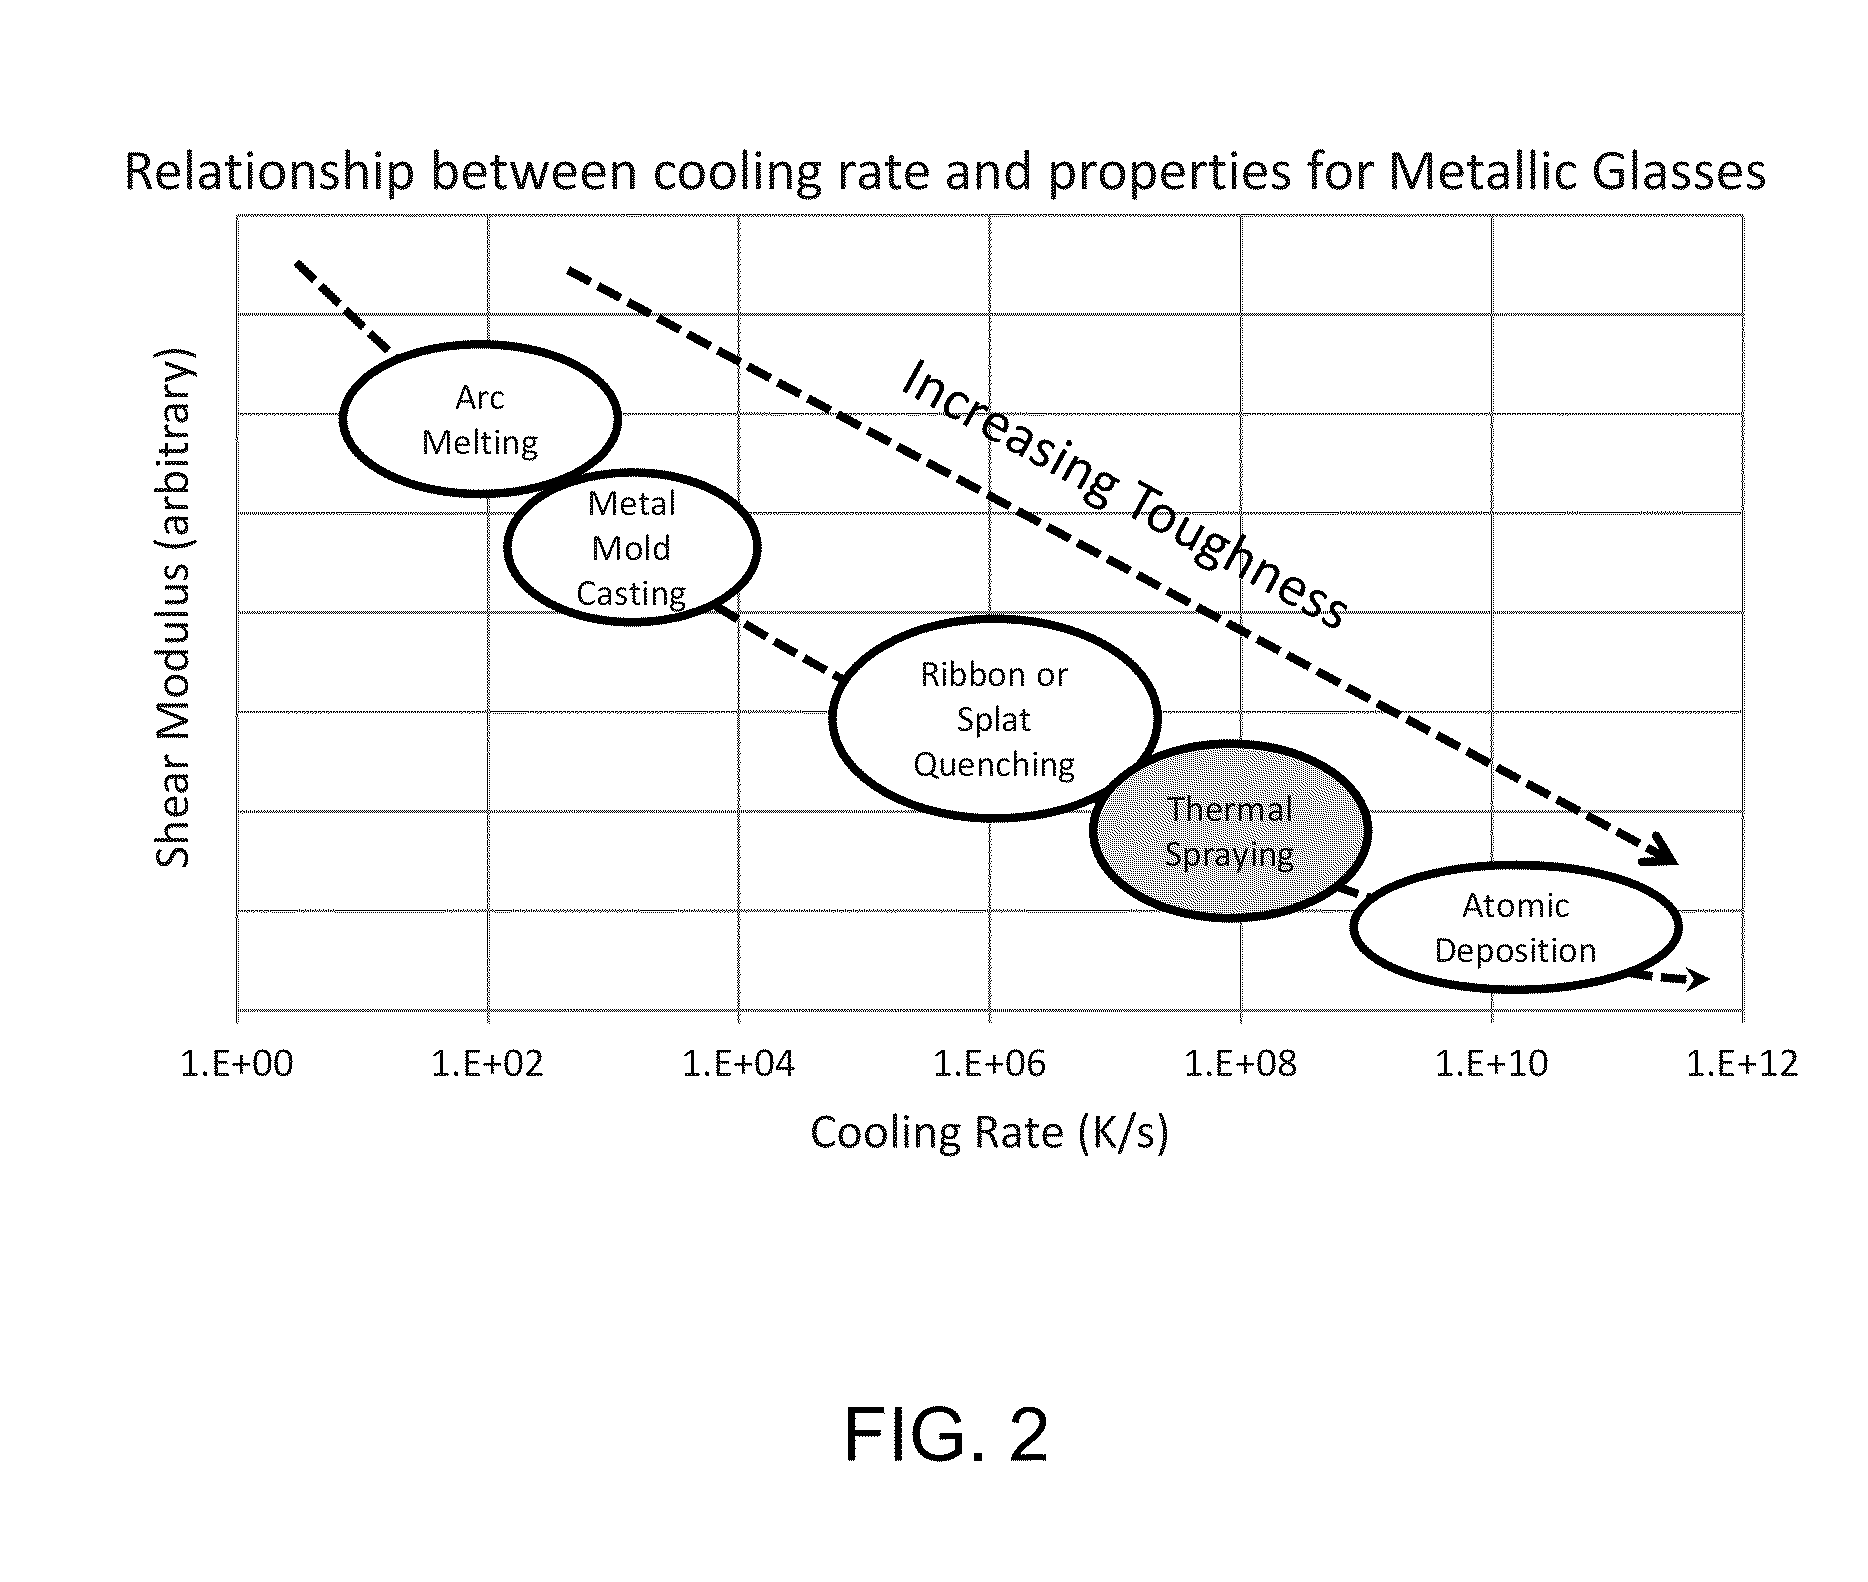 Systems and methods for fabricating objects including amorphous metal using techniques akin to additive manufacturing